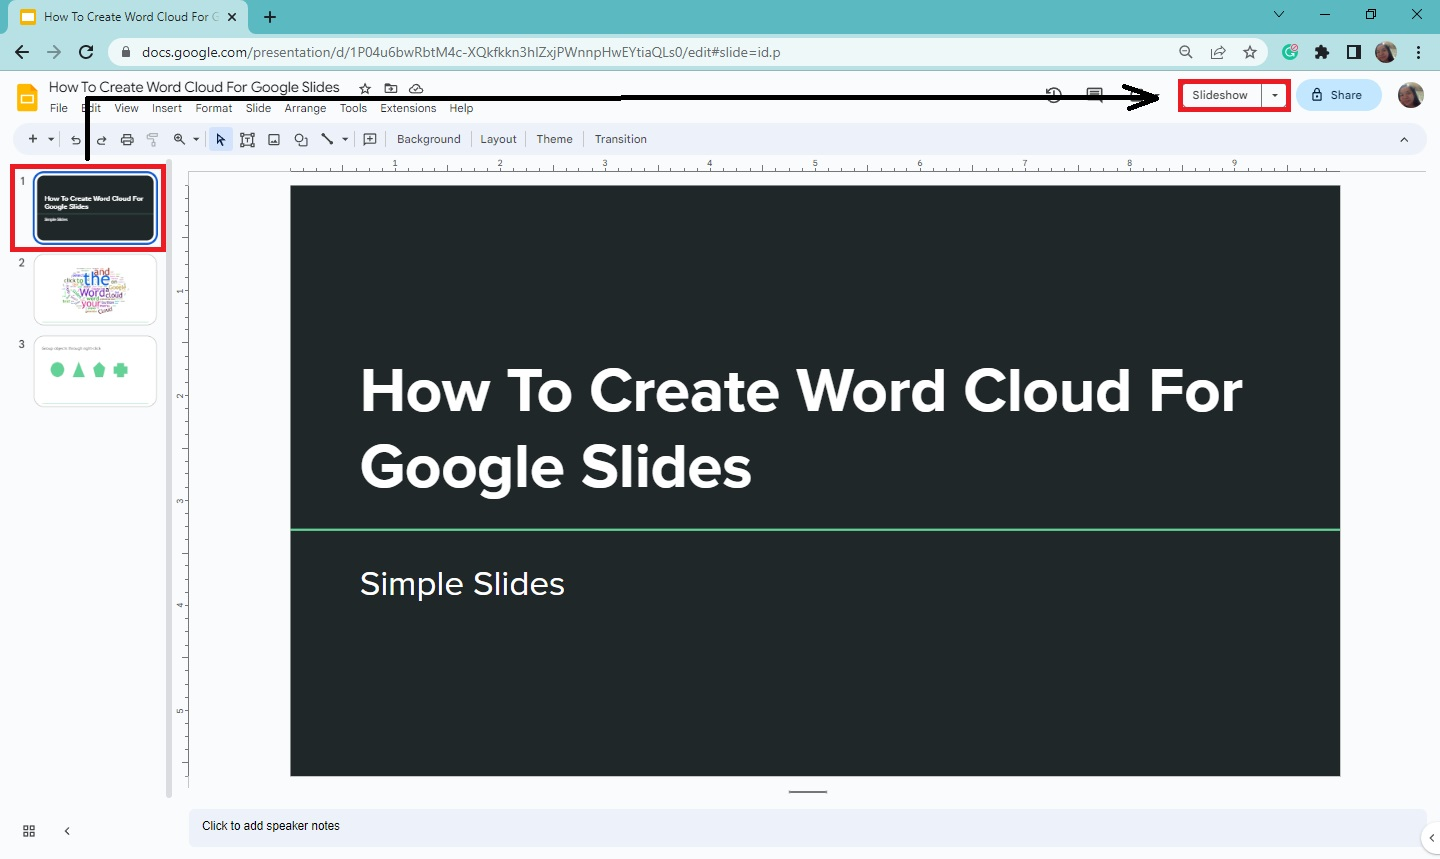 At the upper-right corner of your Google Slides presentation, click the "Slideshow" button.